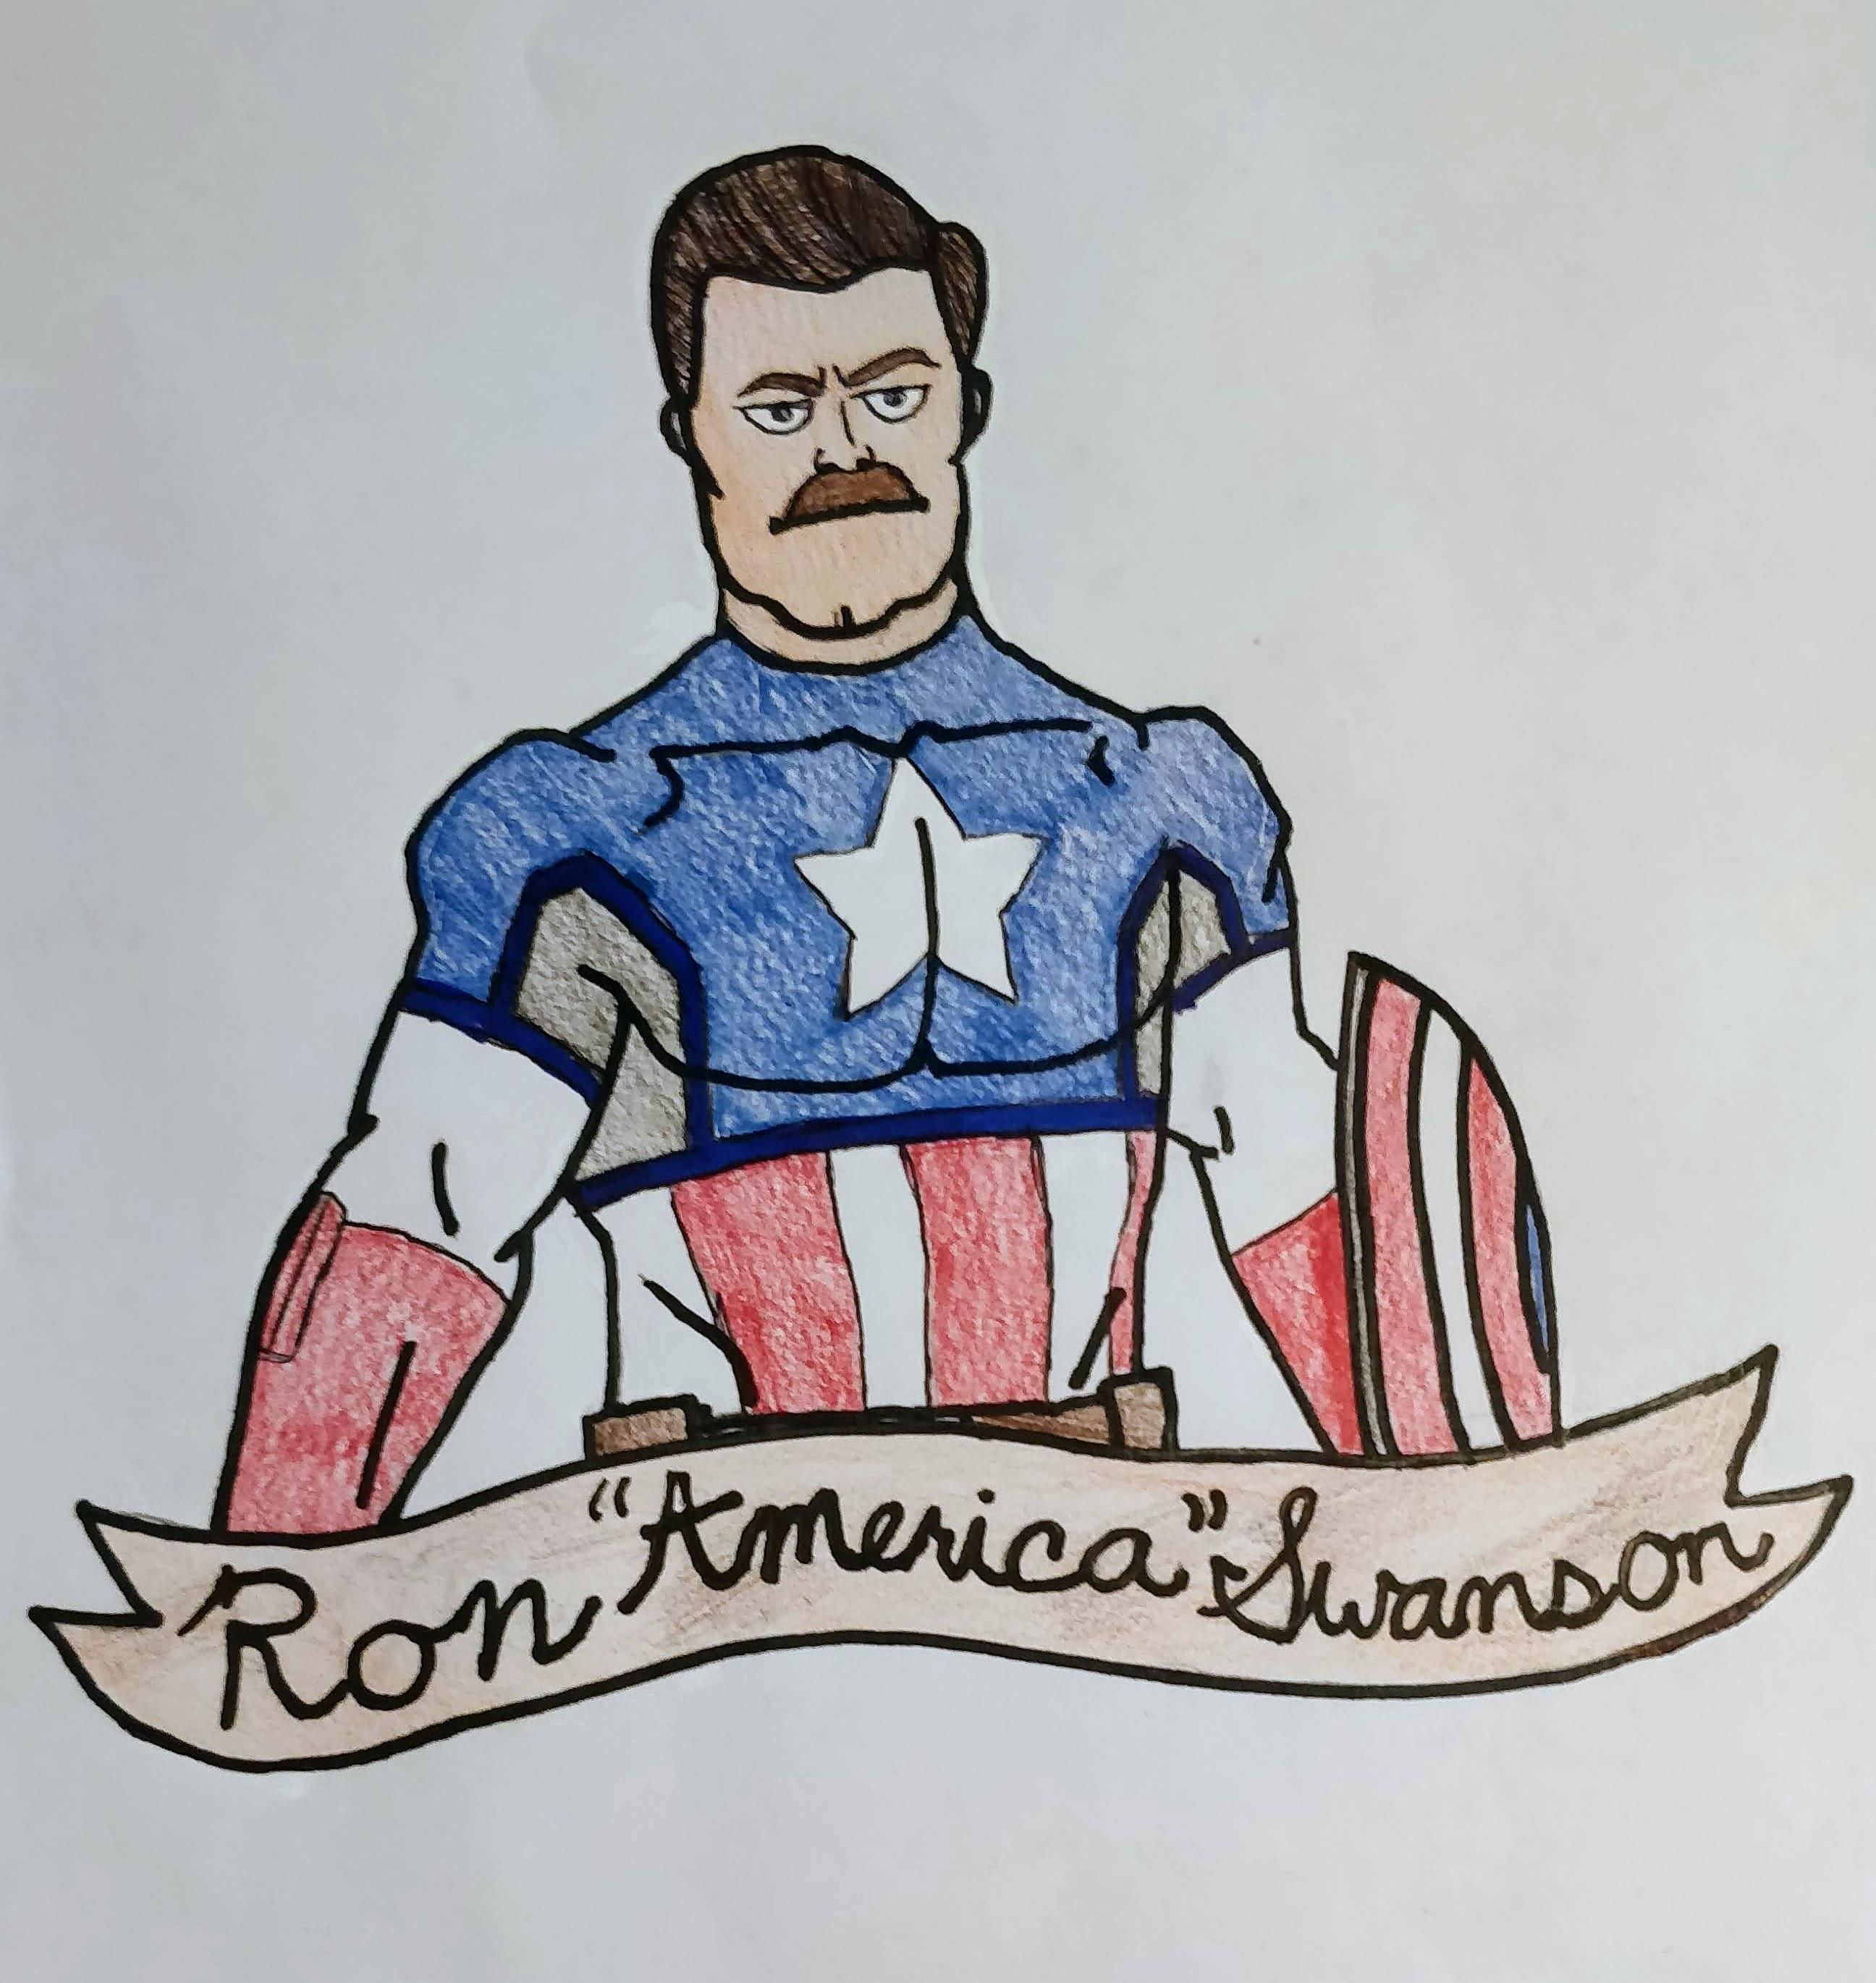 My 12-year-old daughter drew this for me in honor of today. Happy 4th.